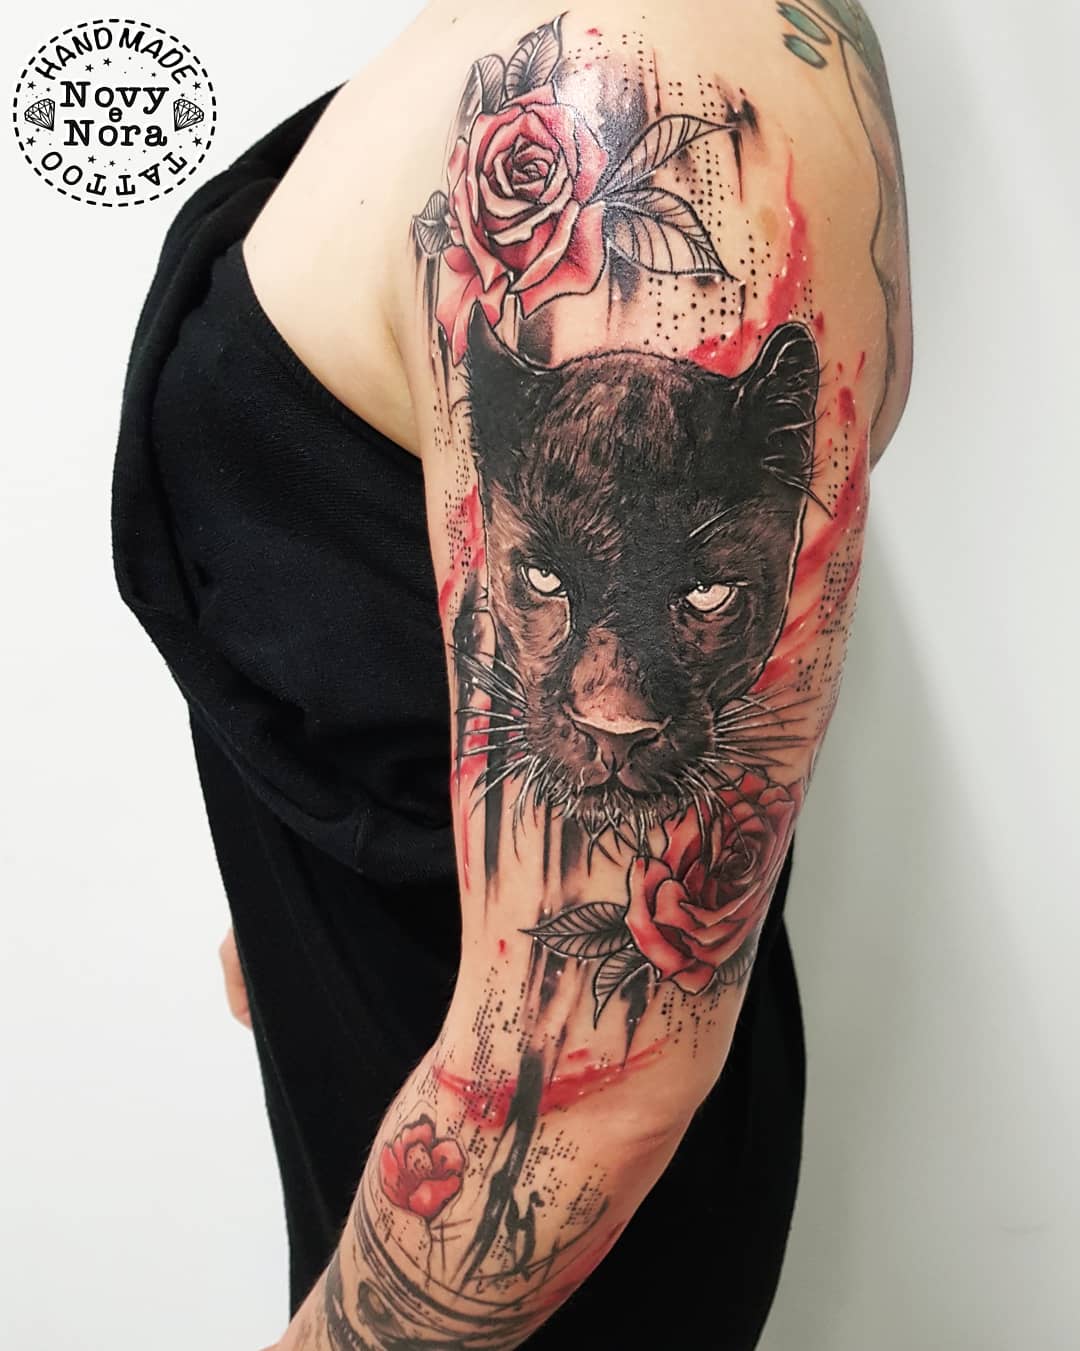 15 Best Panther Tattoo Designs With Meanings